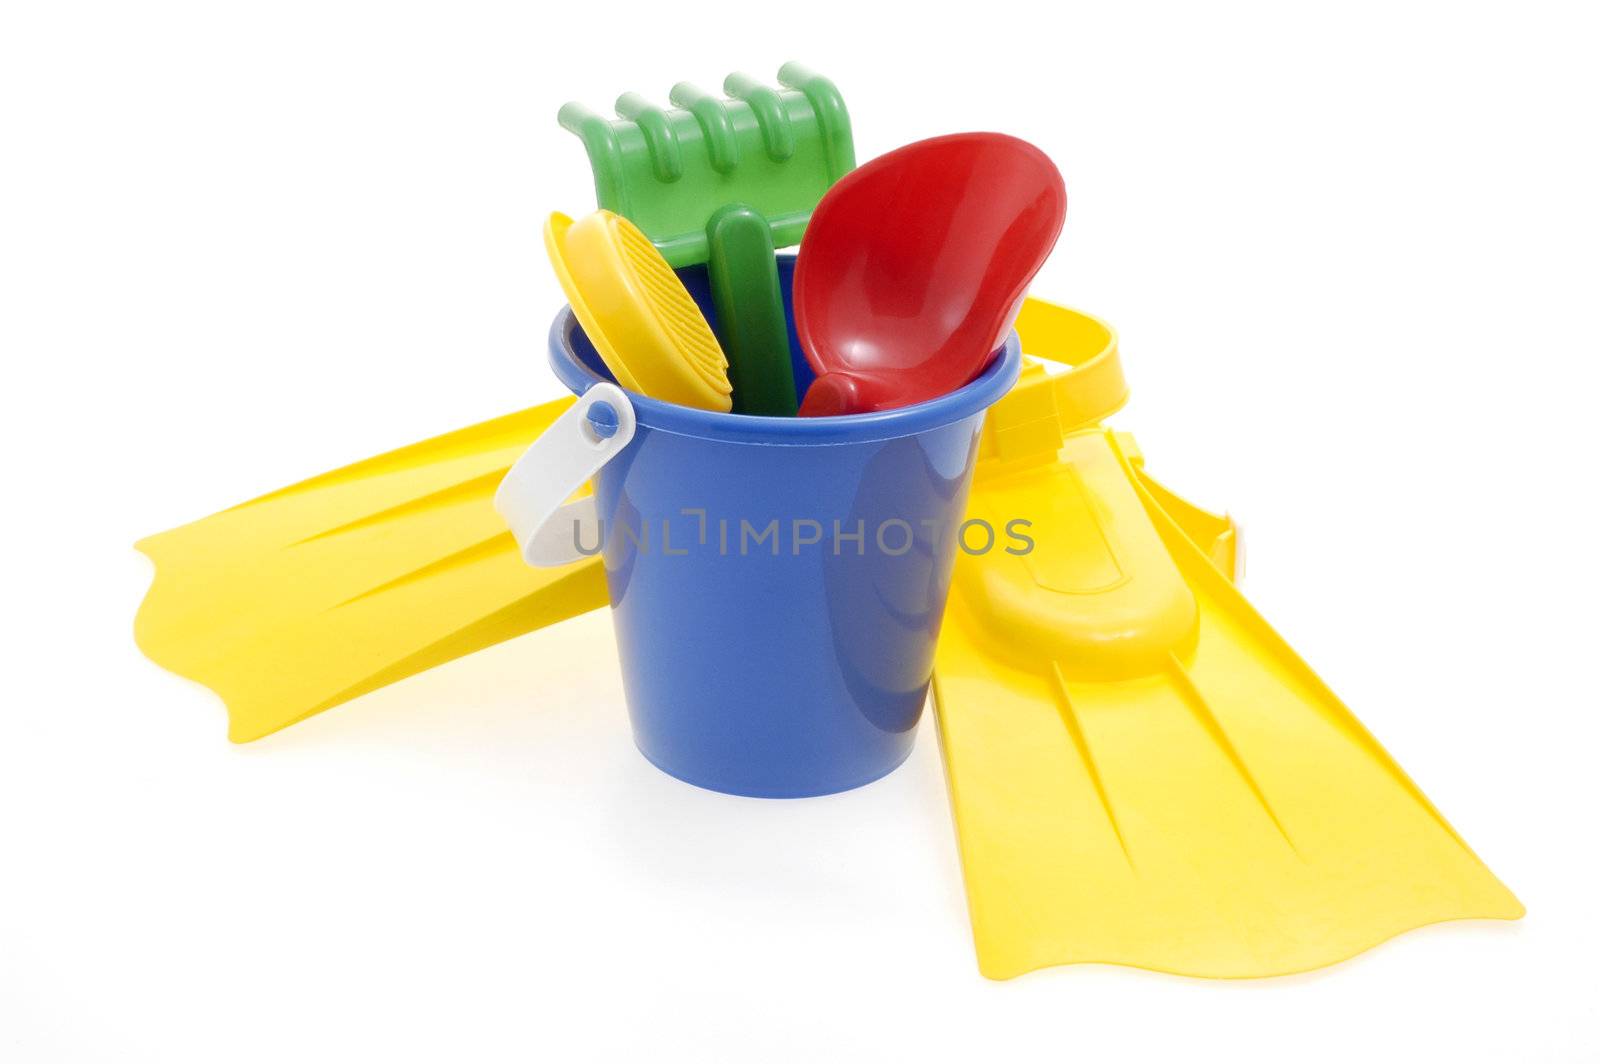 Assortment of colorful beach toys on a white background.